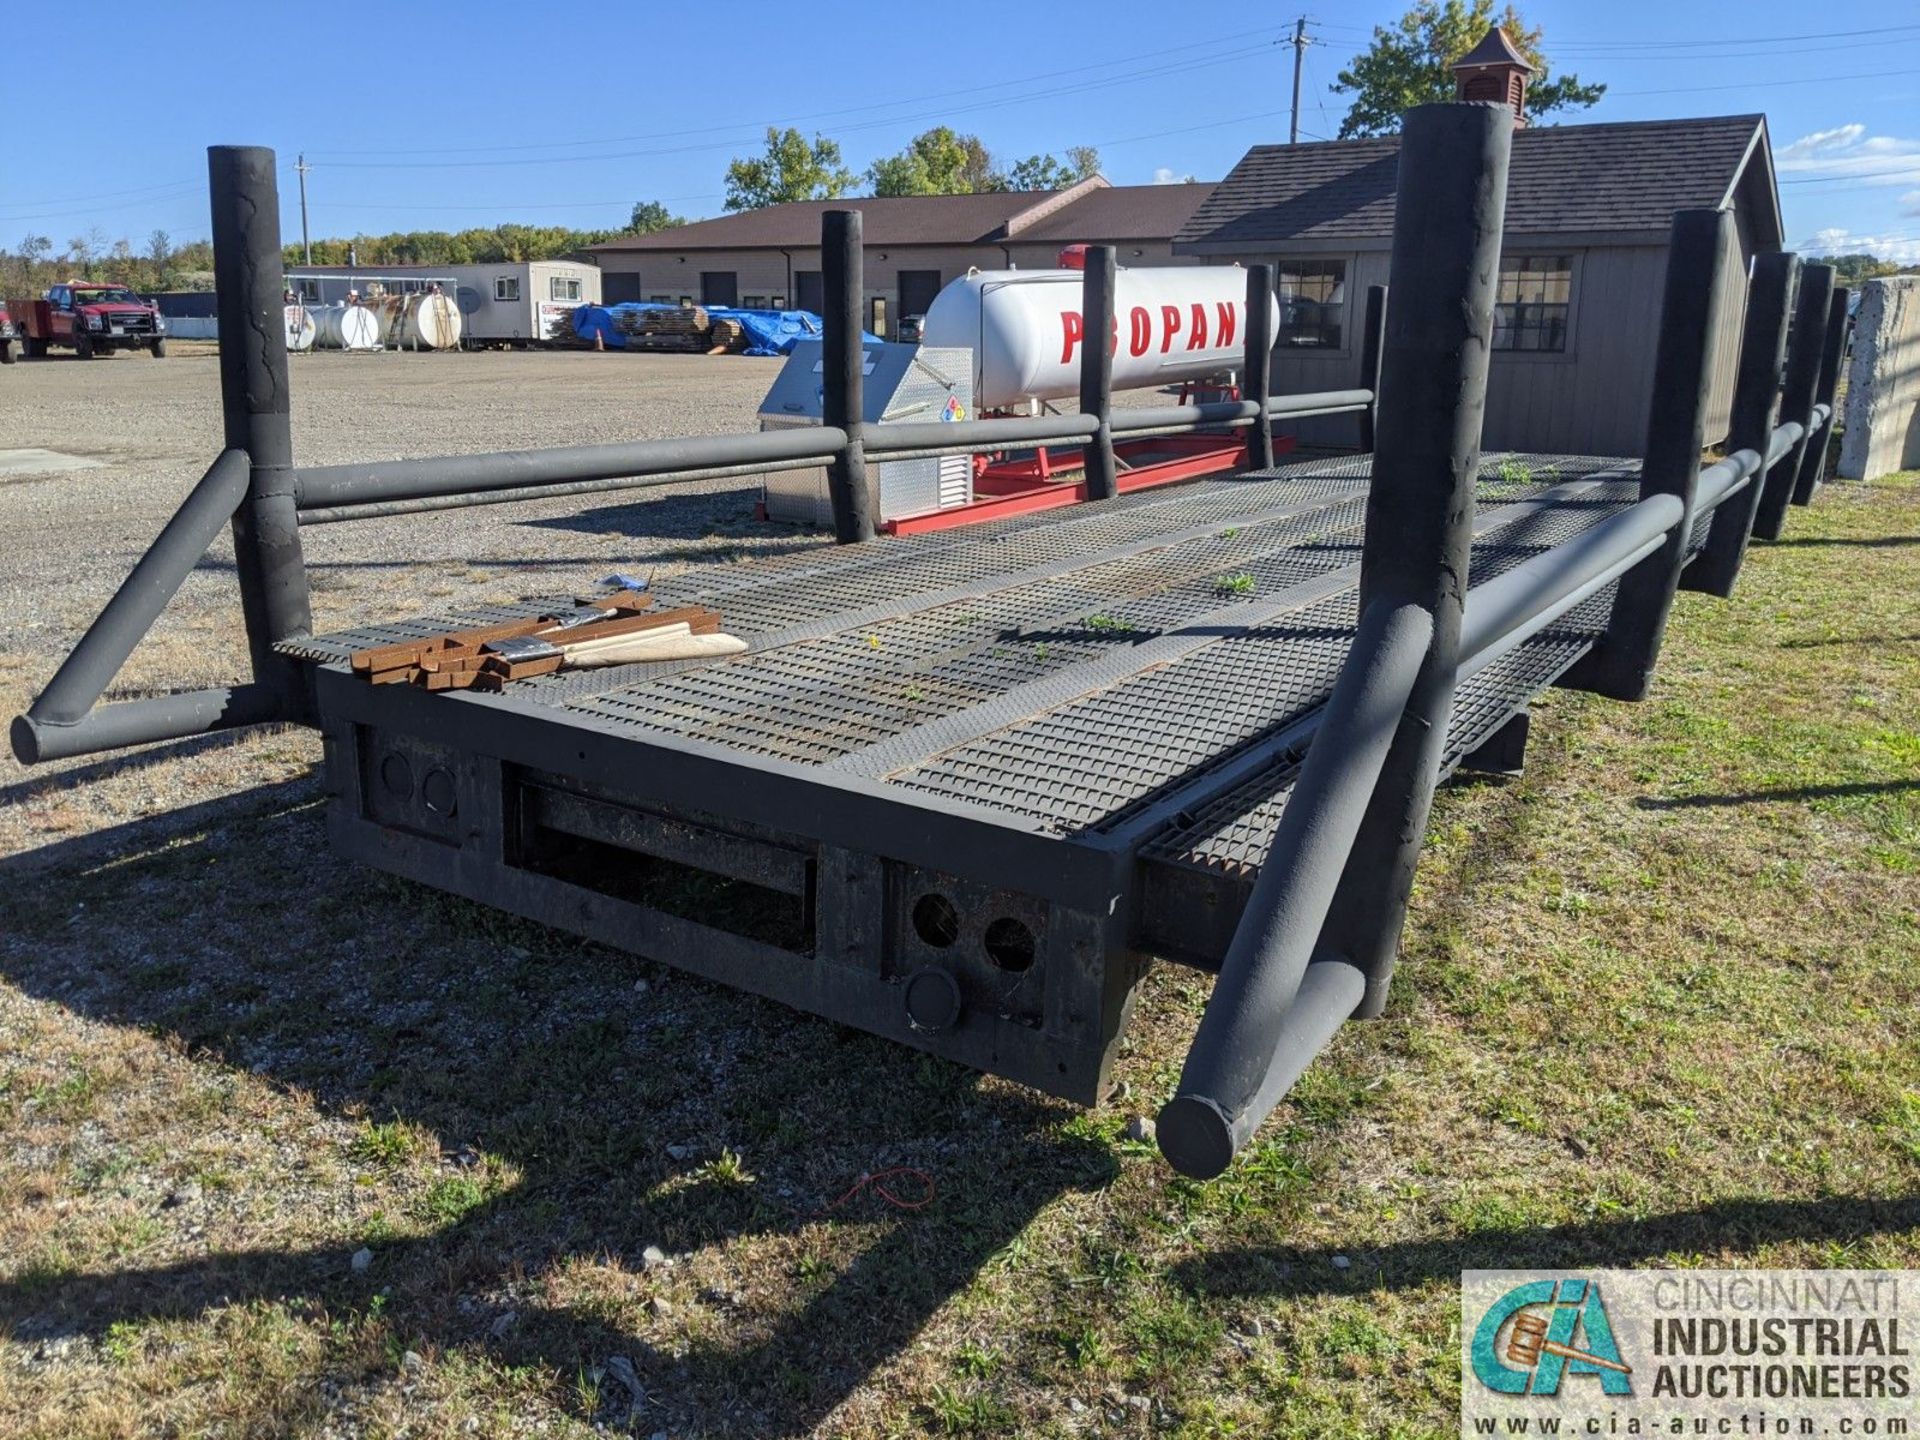 10' WIDE X 36' LONG TRUCK BED CONVERTED TO A BRIDGE; STEEL GRATE TOP, SIDE RAILS (220 Blackbrook - Image 2 of 5